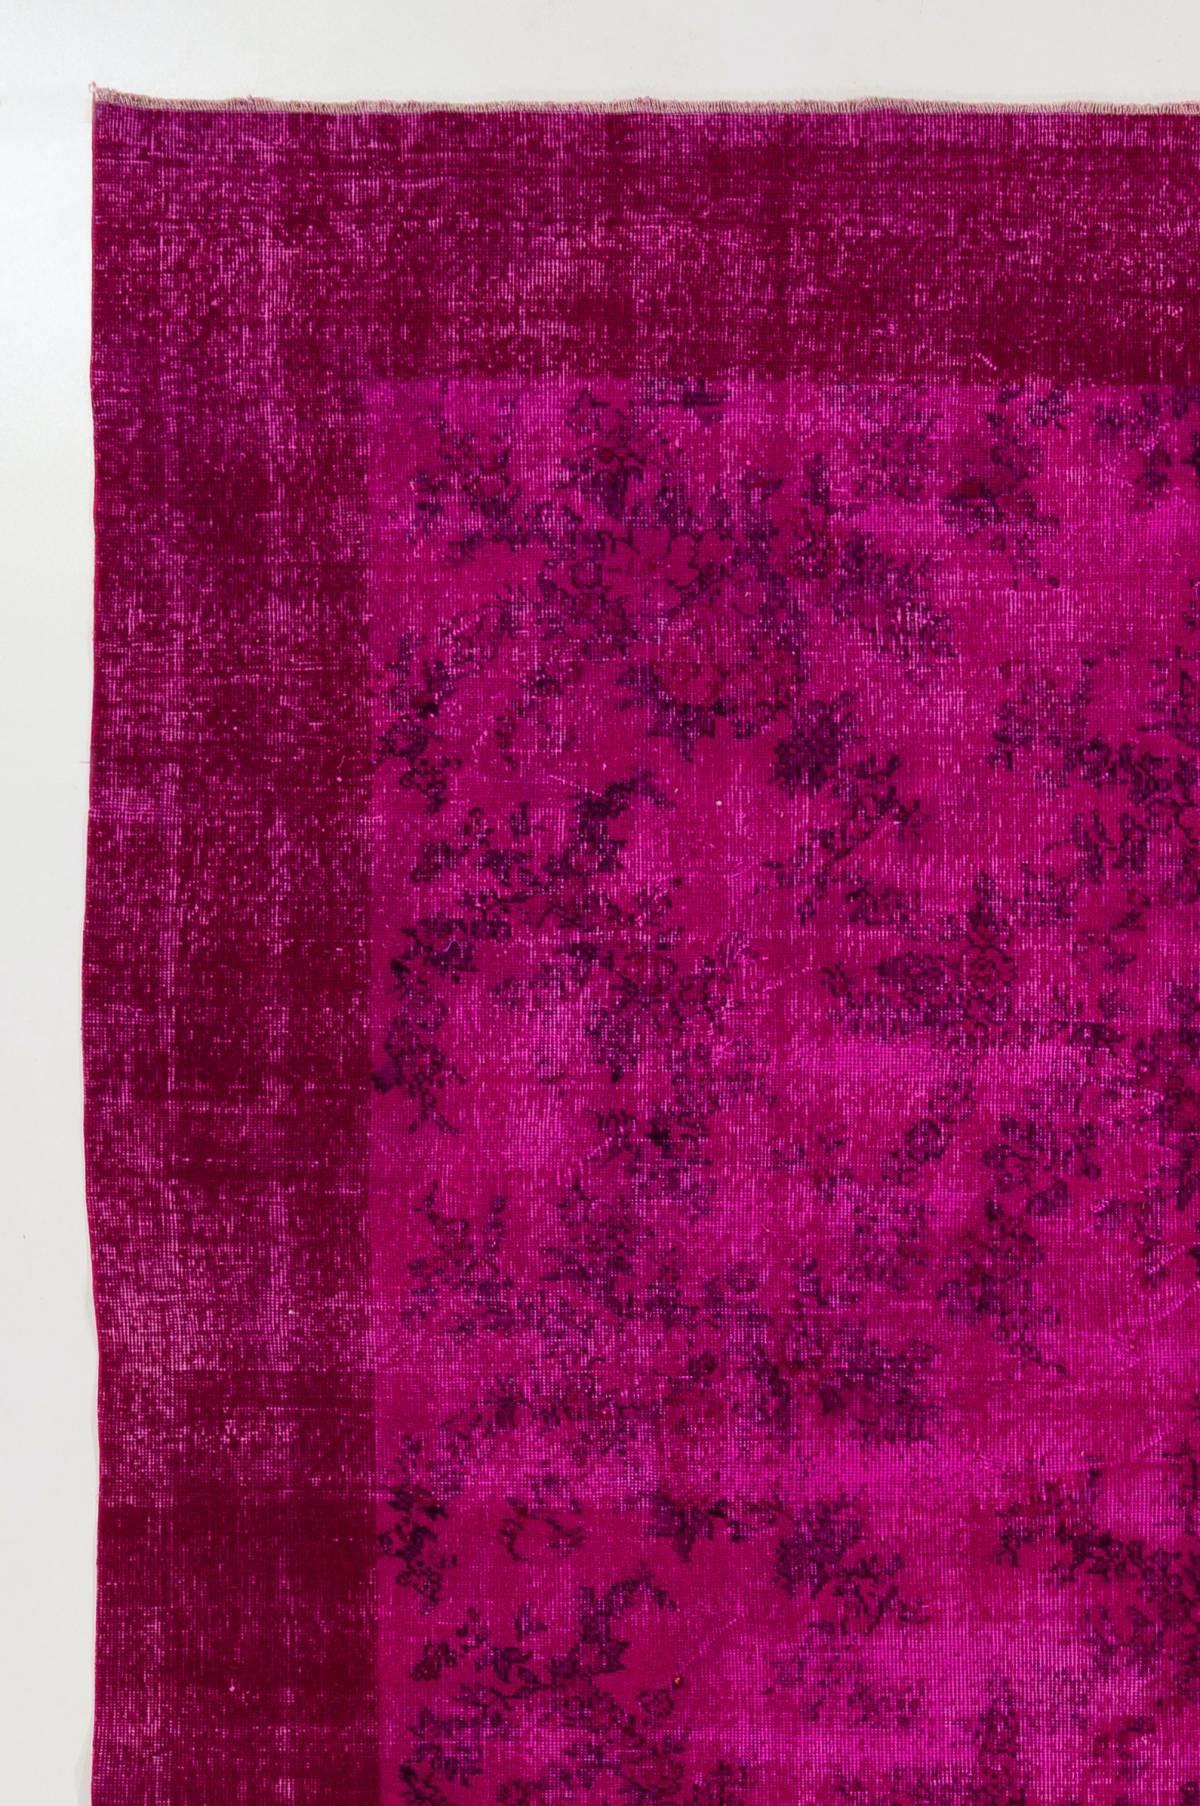 A vintage Turkish area rug re-dyed in fuchsia pink color for contemporary interiors. Measures: 7.7 x 11.7 Ft.
Finely hand knotted, low wool pile on cotton foundation. Professionally washed.
Sturdy and can be used on a high traffic area, suitable